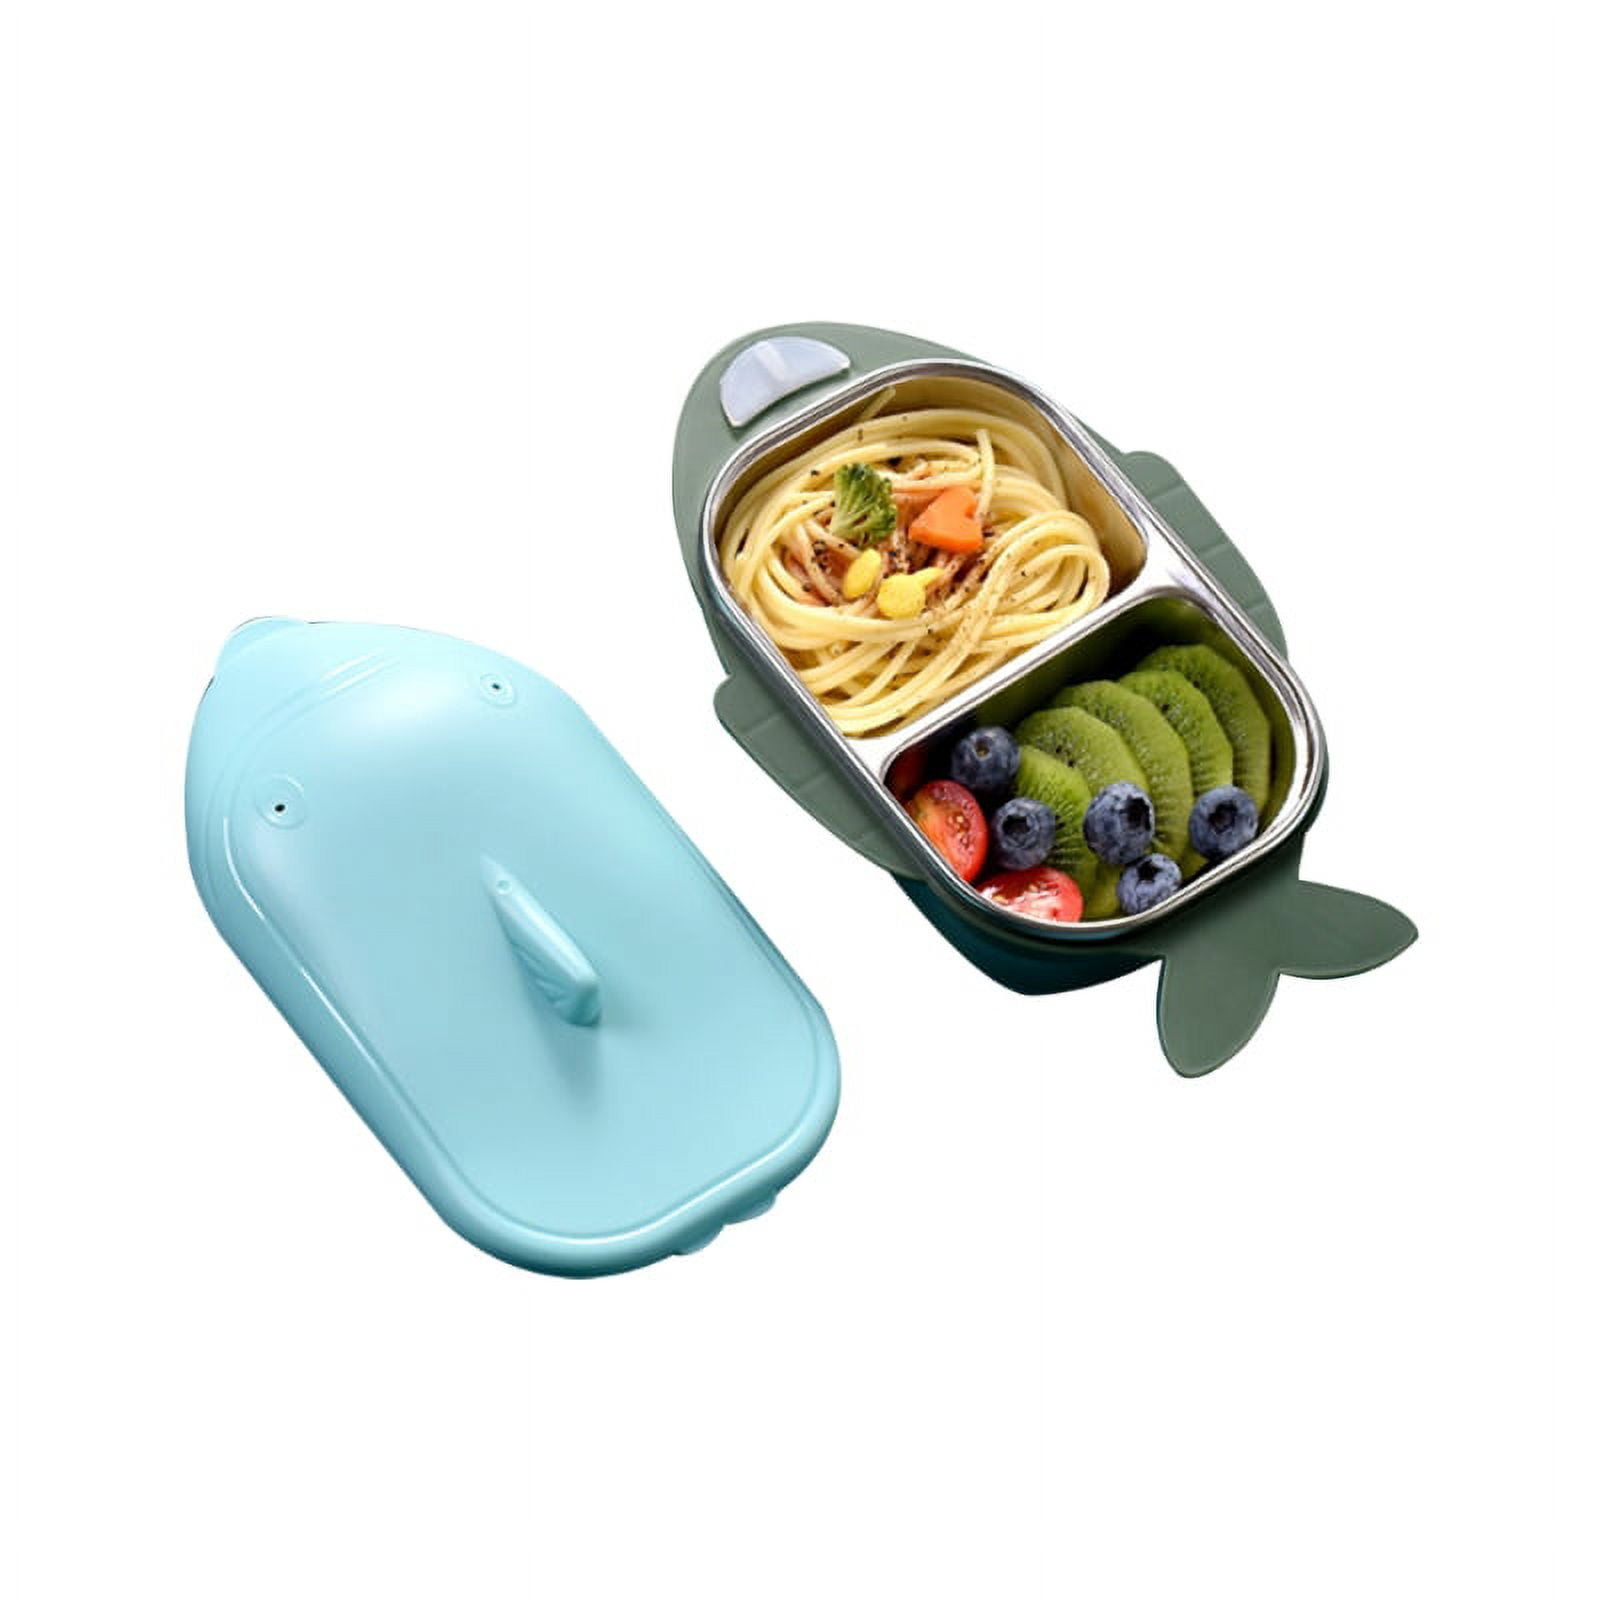 Monfince 500m Plastic Portable Soup Cup With Lid Lunch Box Food